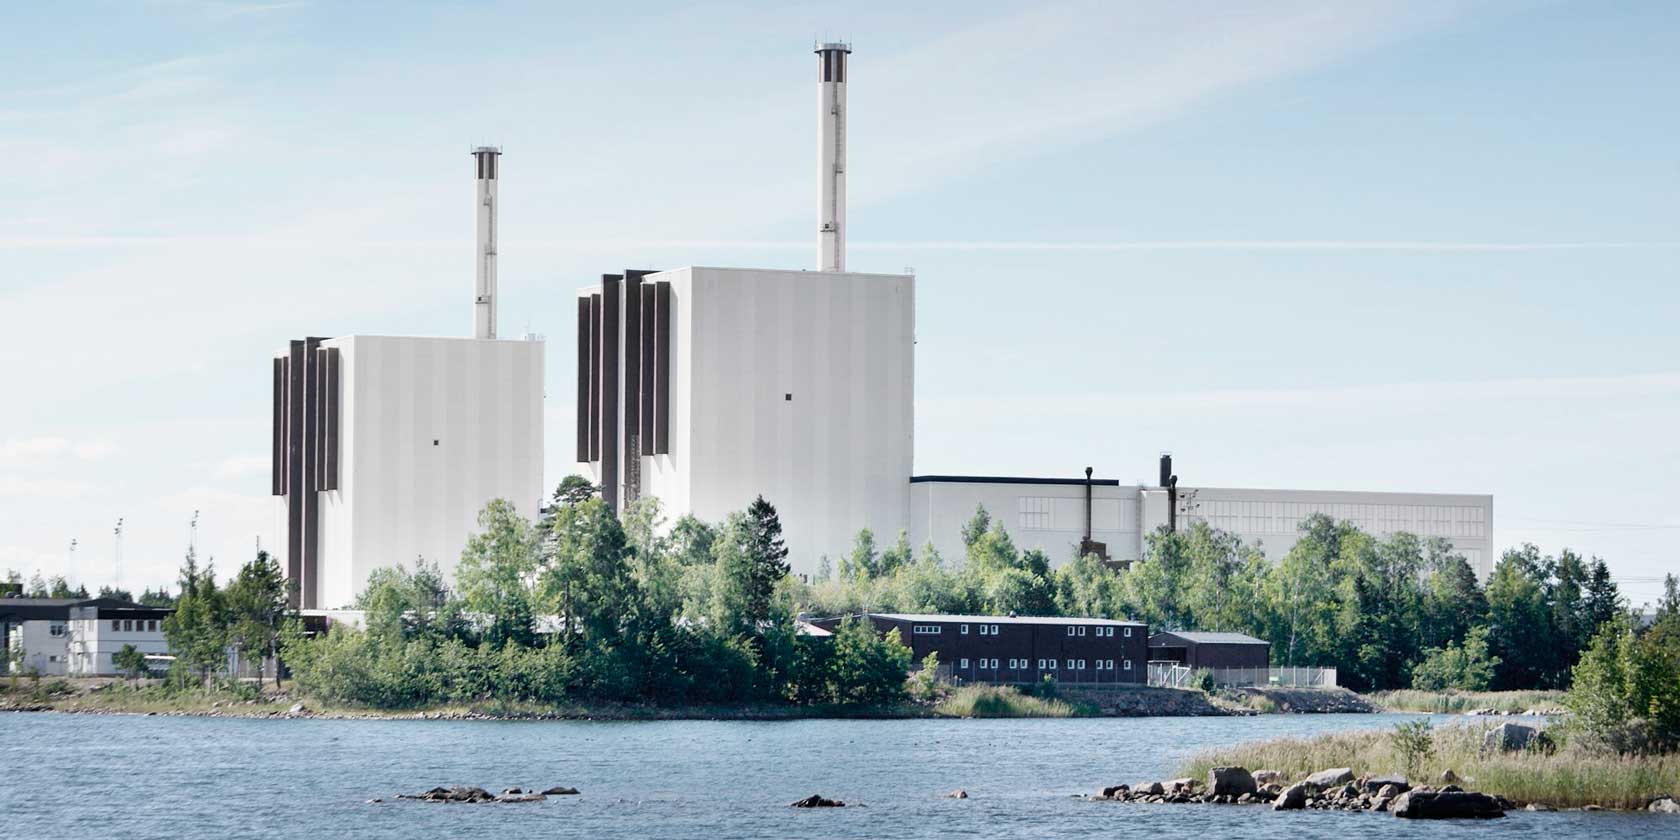 Forsmark nuclear power plant in Sweden